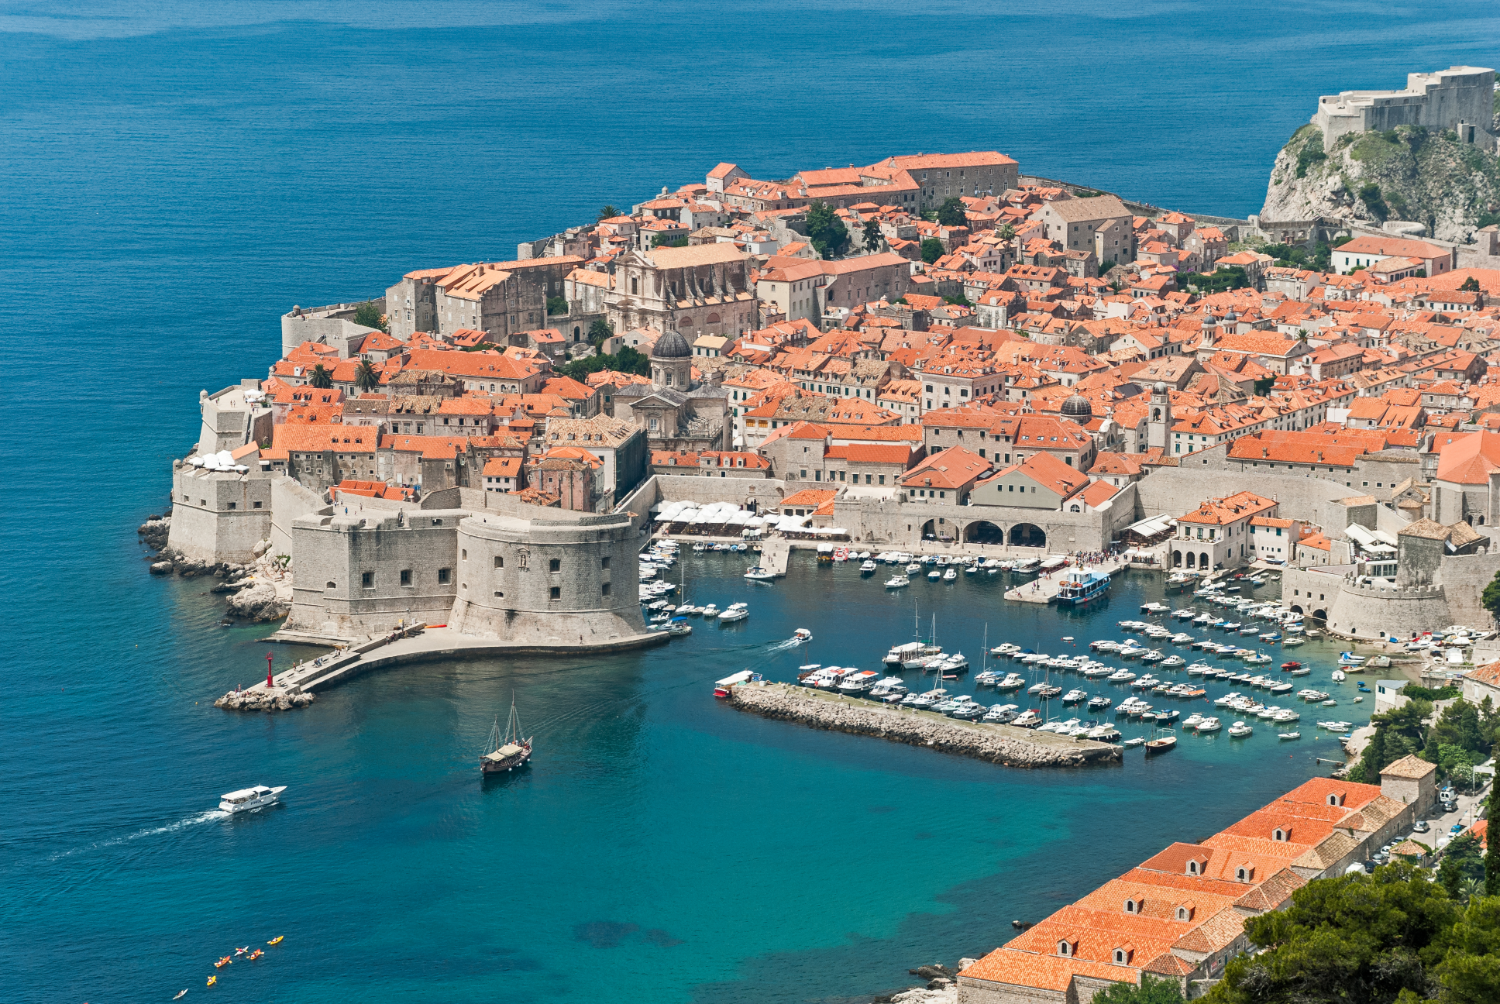 Dubrovnik in Croatia is best known for its medieval center